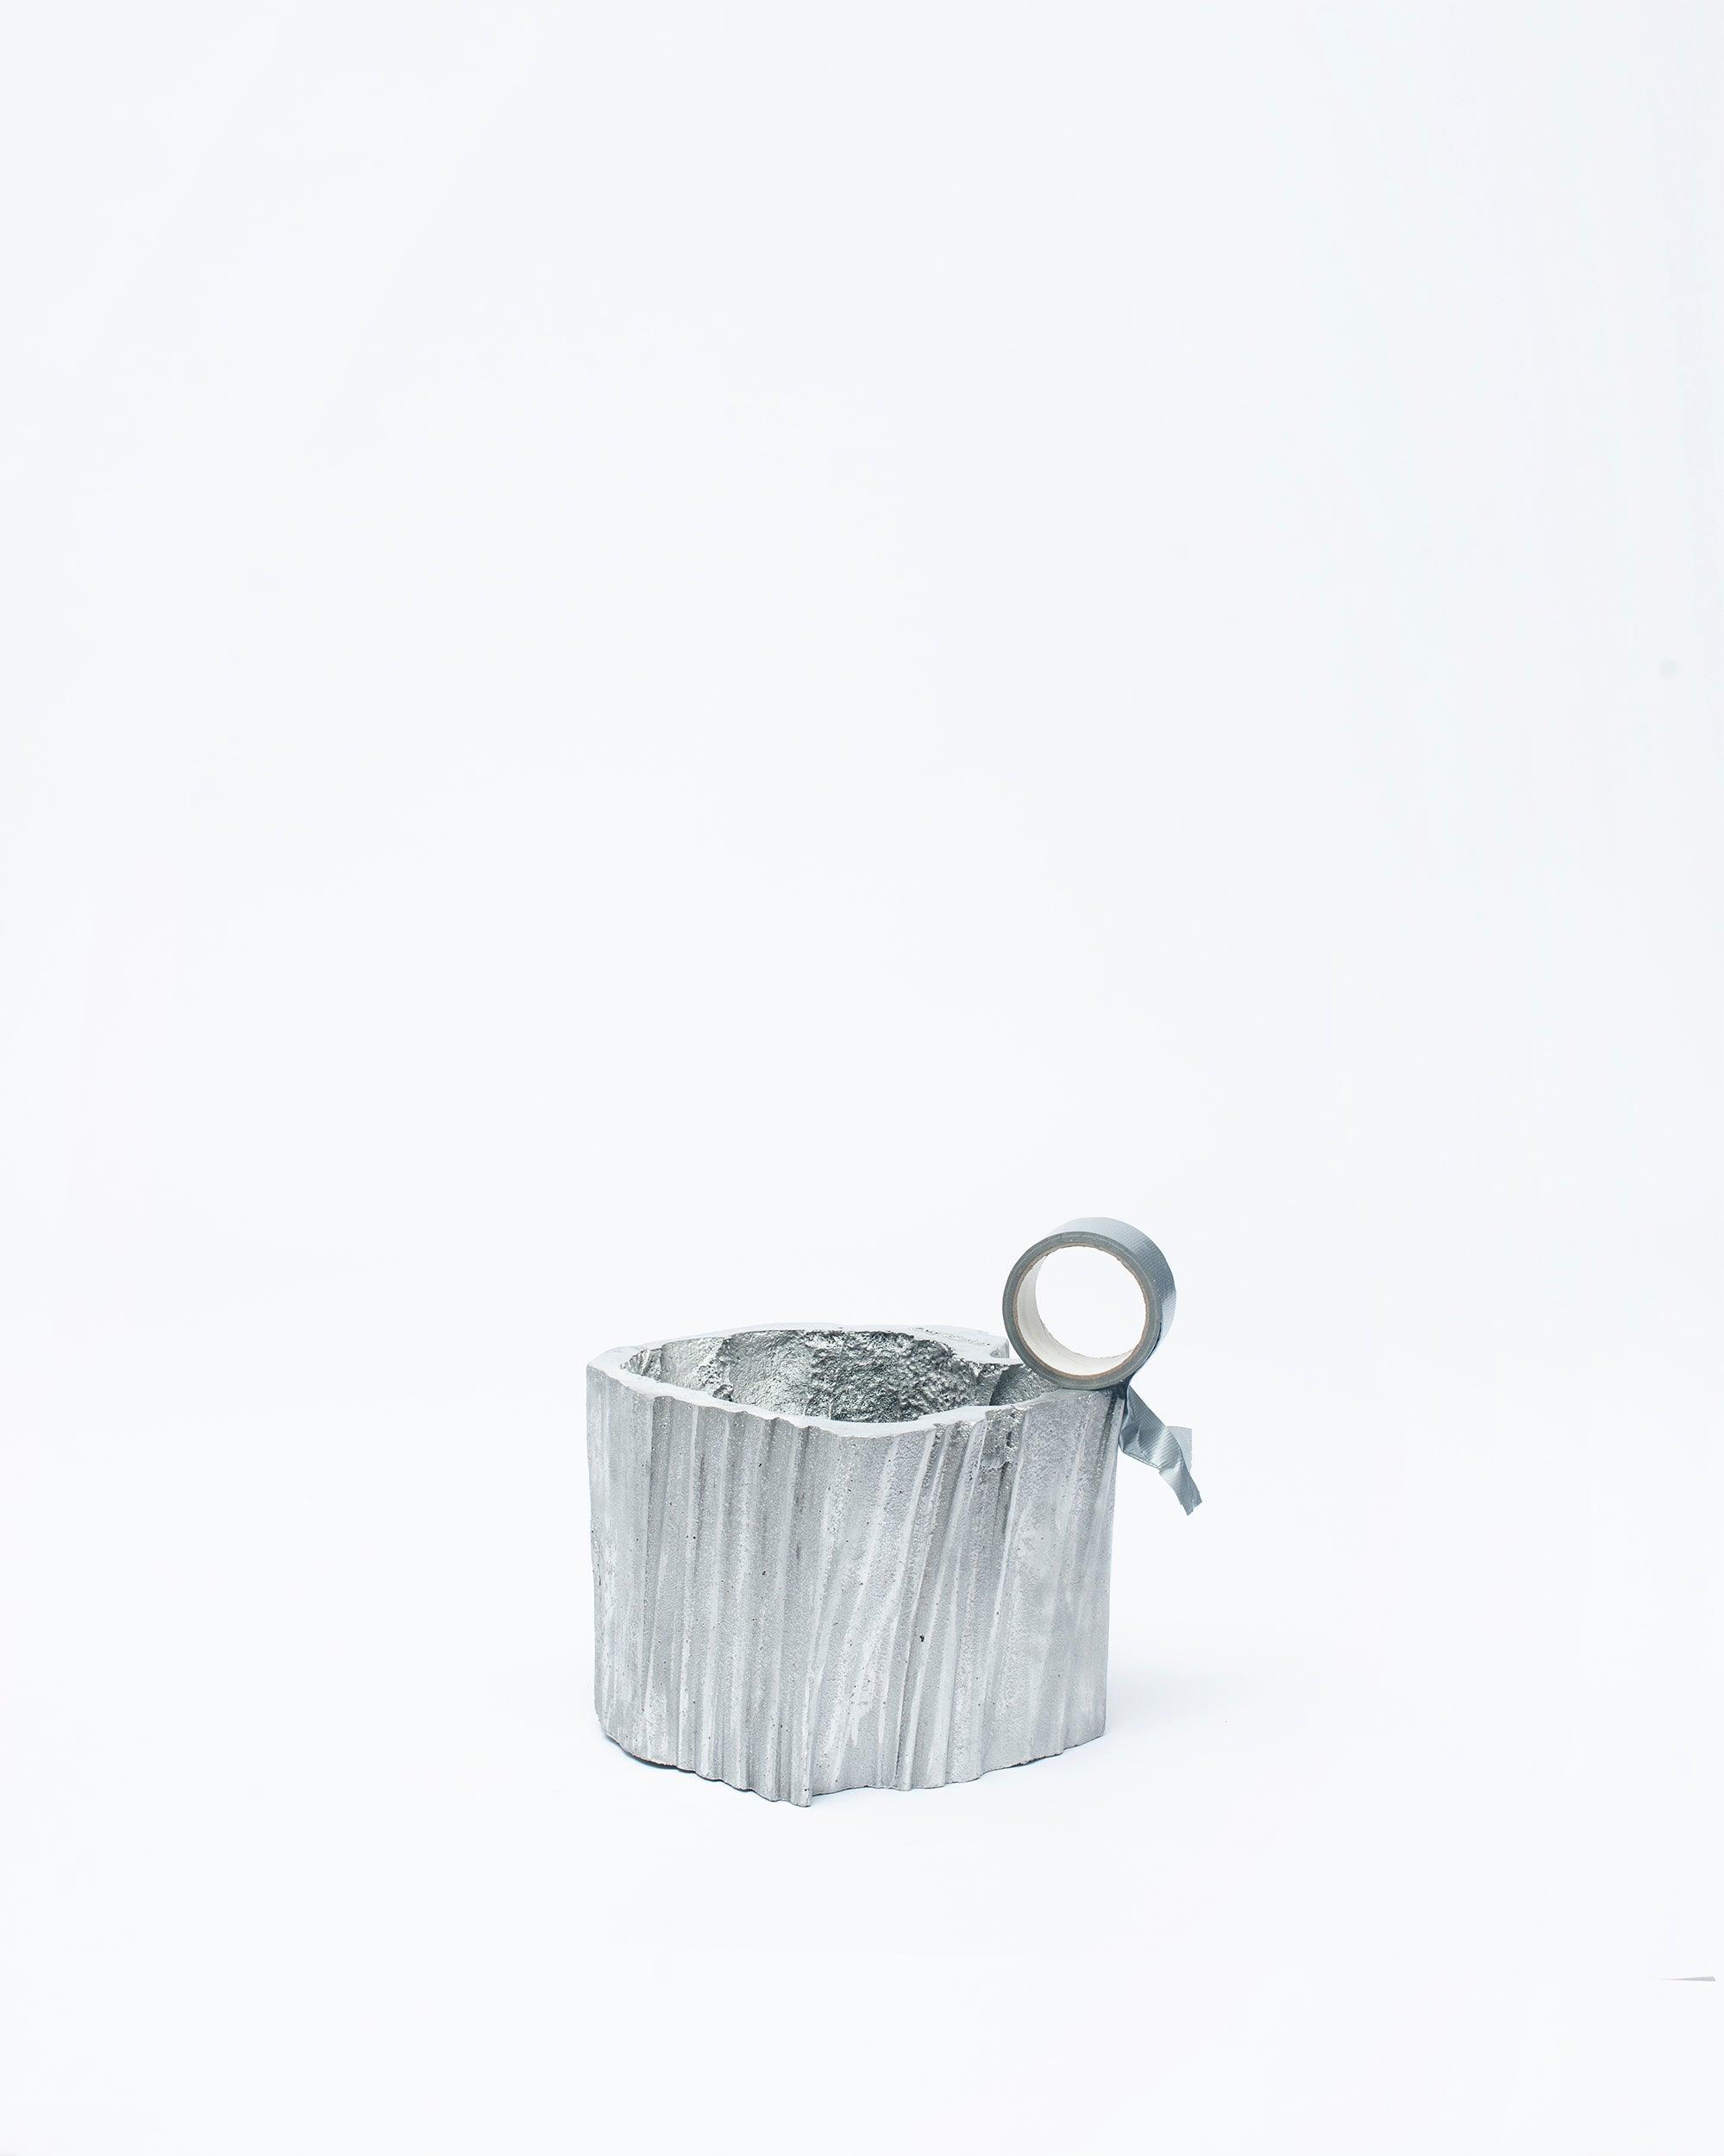 White background, scooped bucket smaller with round handle